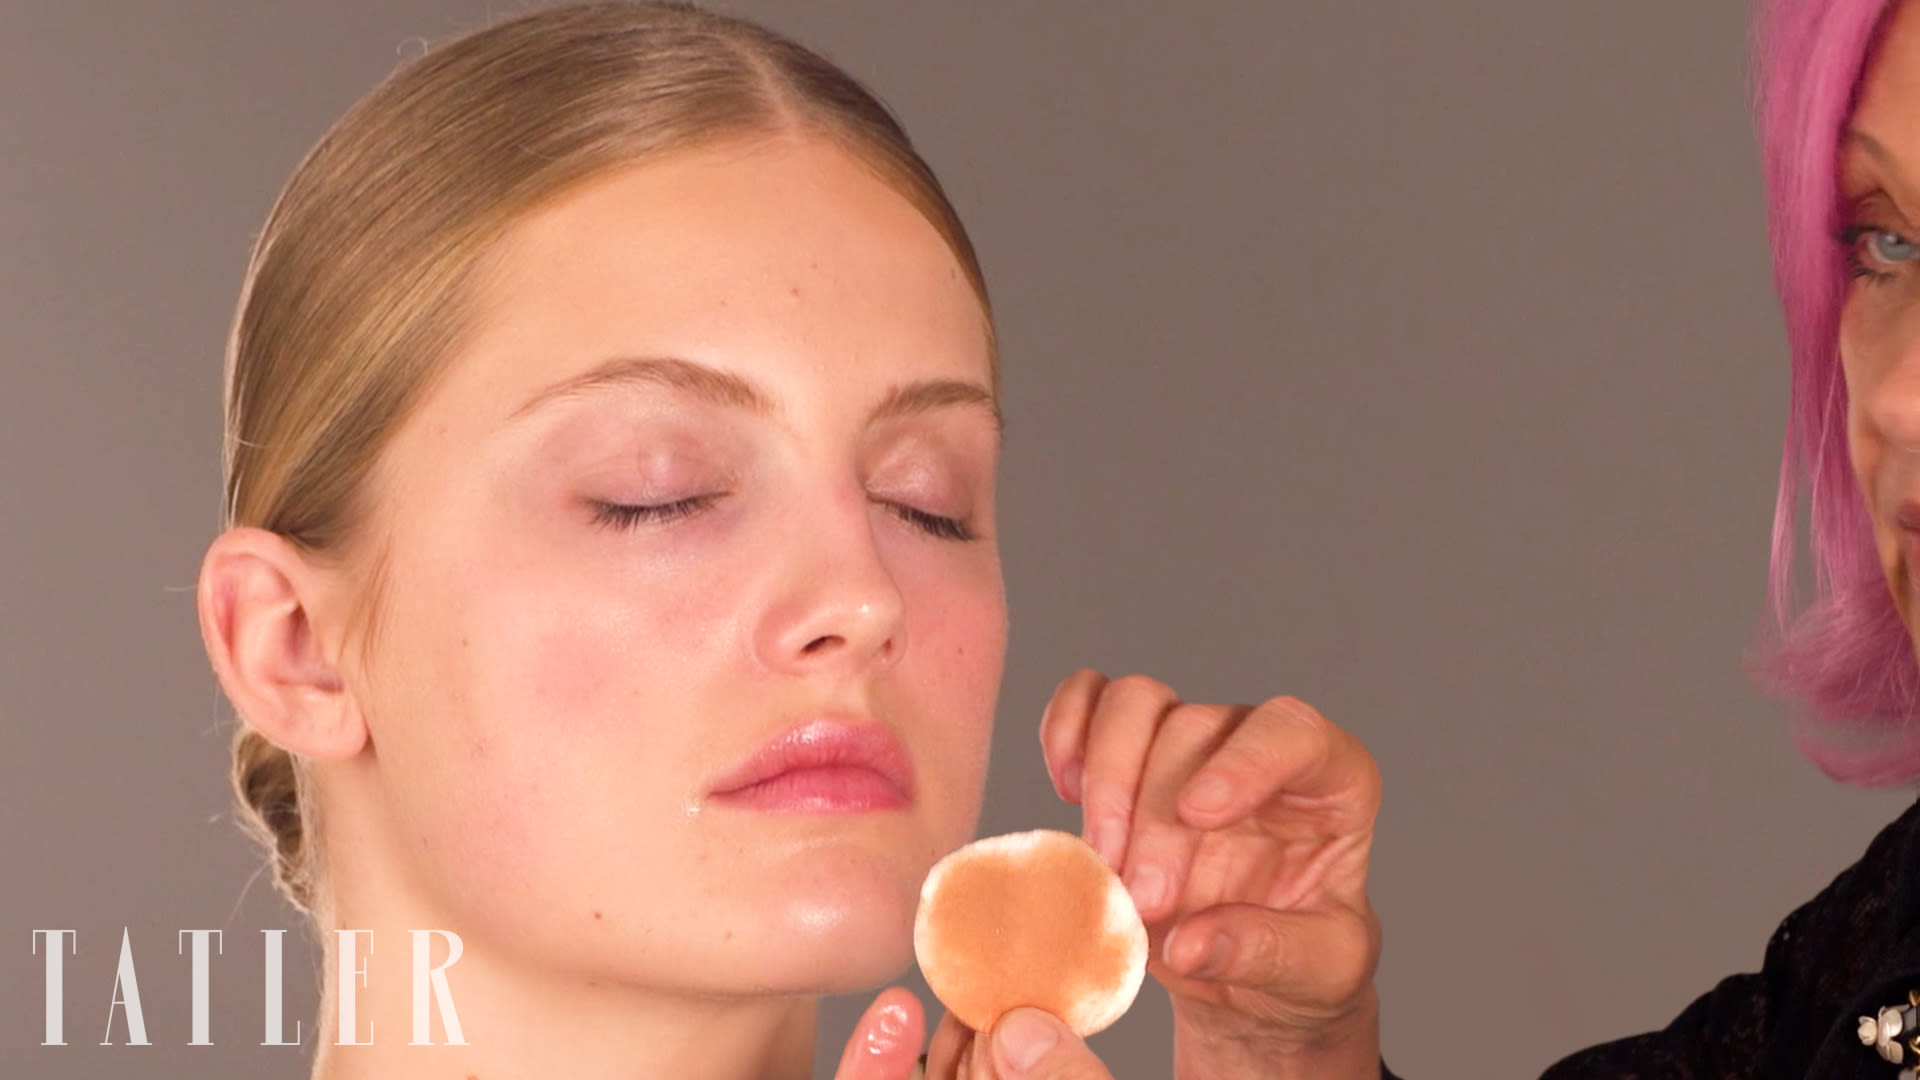 Watch 4 Easy Steps To Remove Makeup & Revitalise Skin: CHANEL